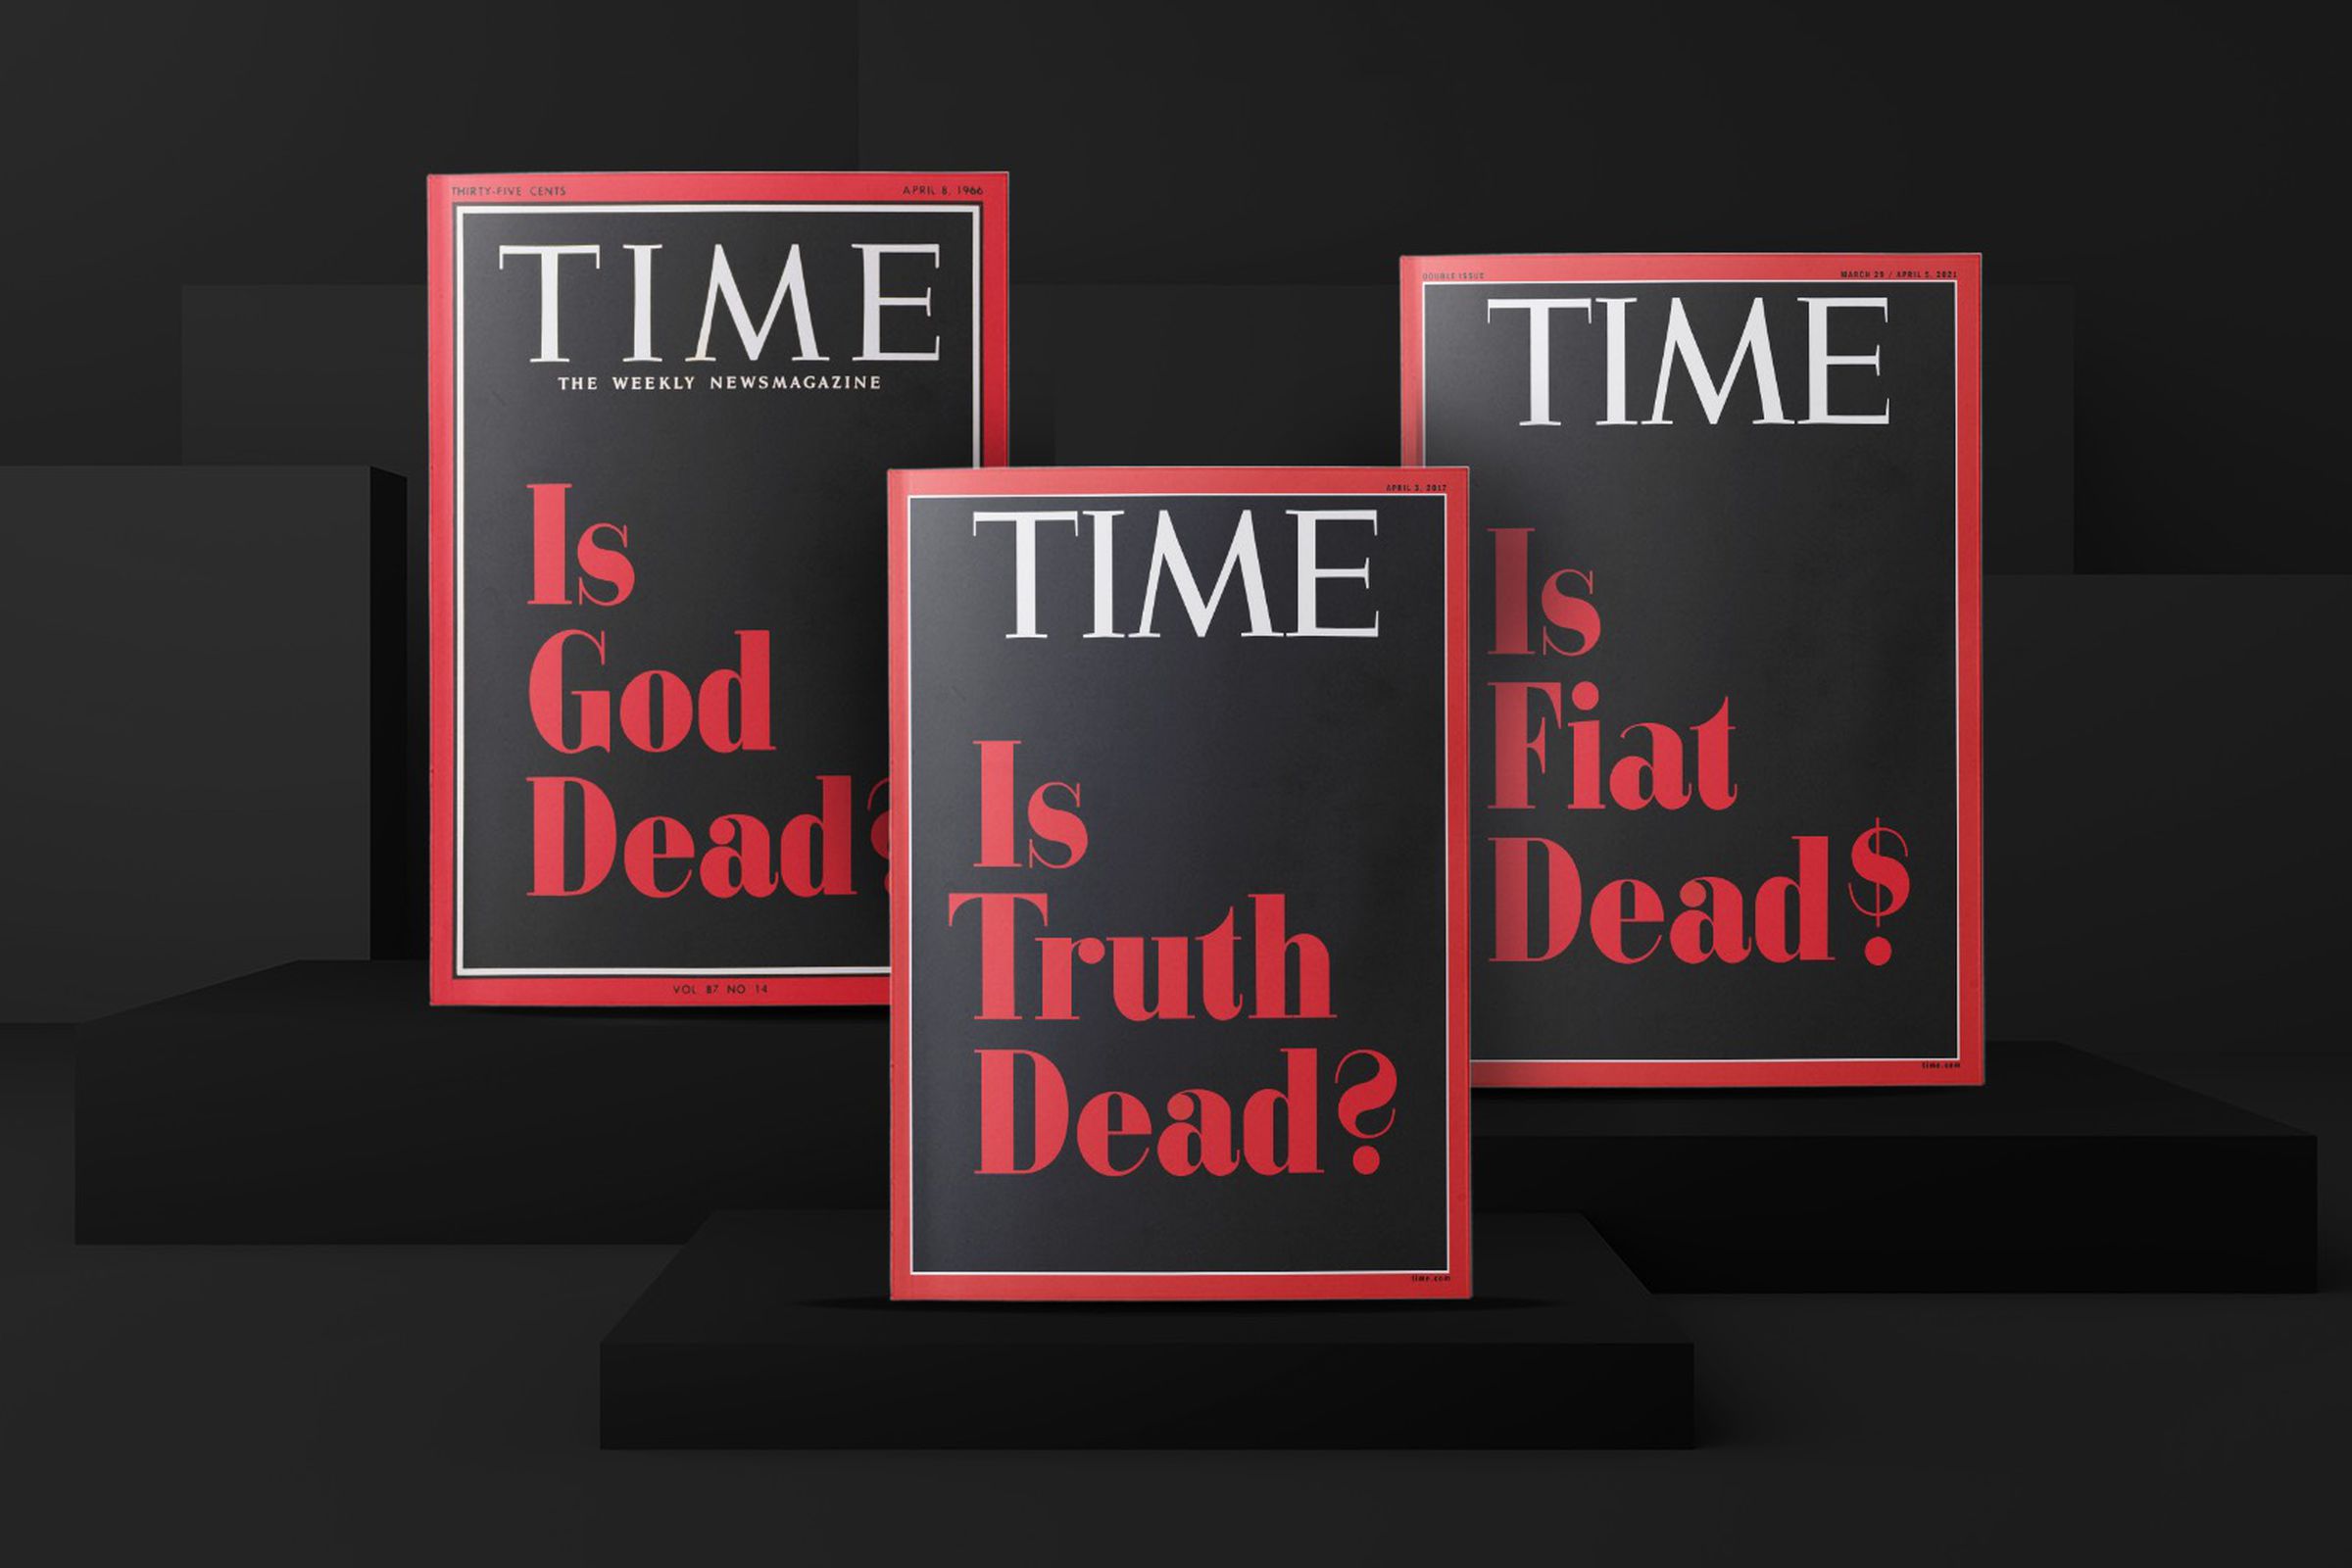 Three Time magazine front covers reading “Is God Dead?,” “Is Truth Dead?,” and “Is Fiat Dead?”